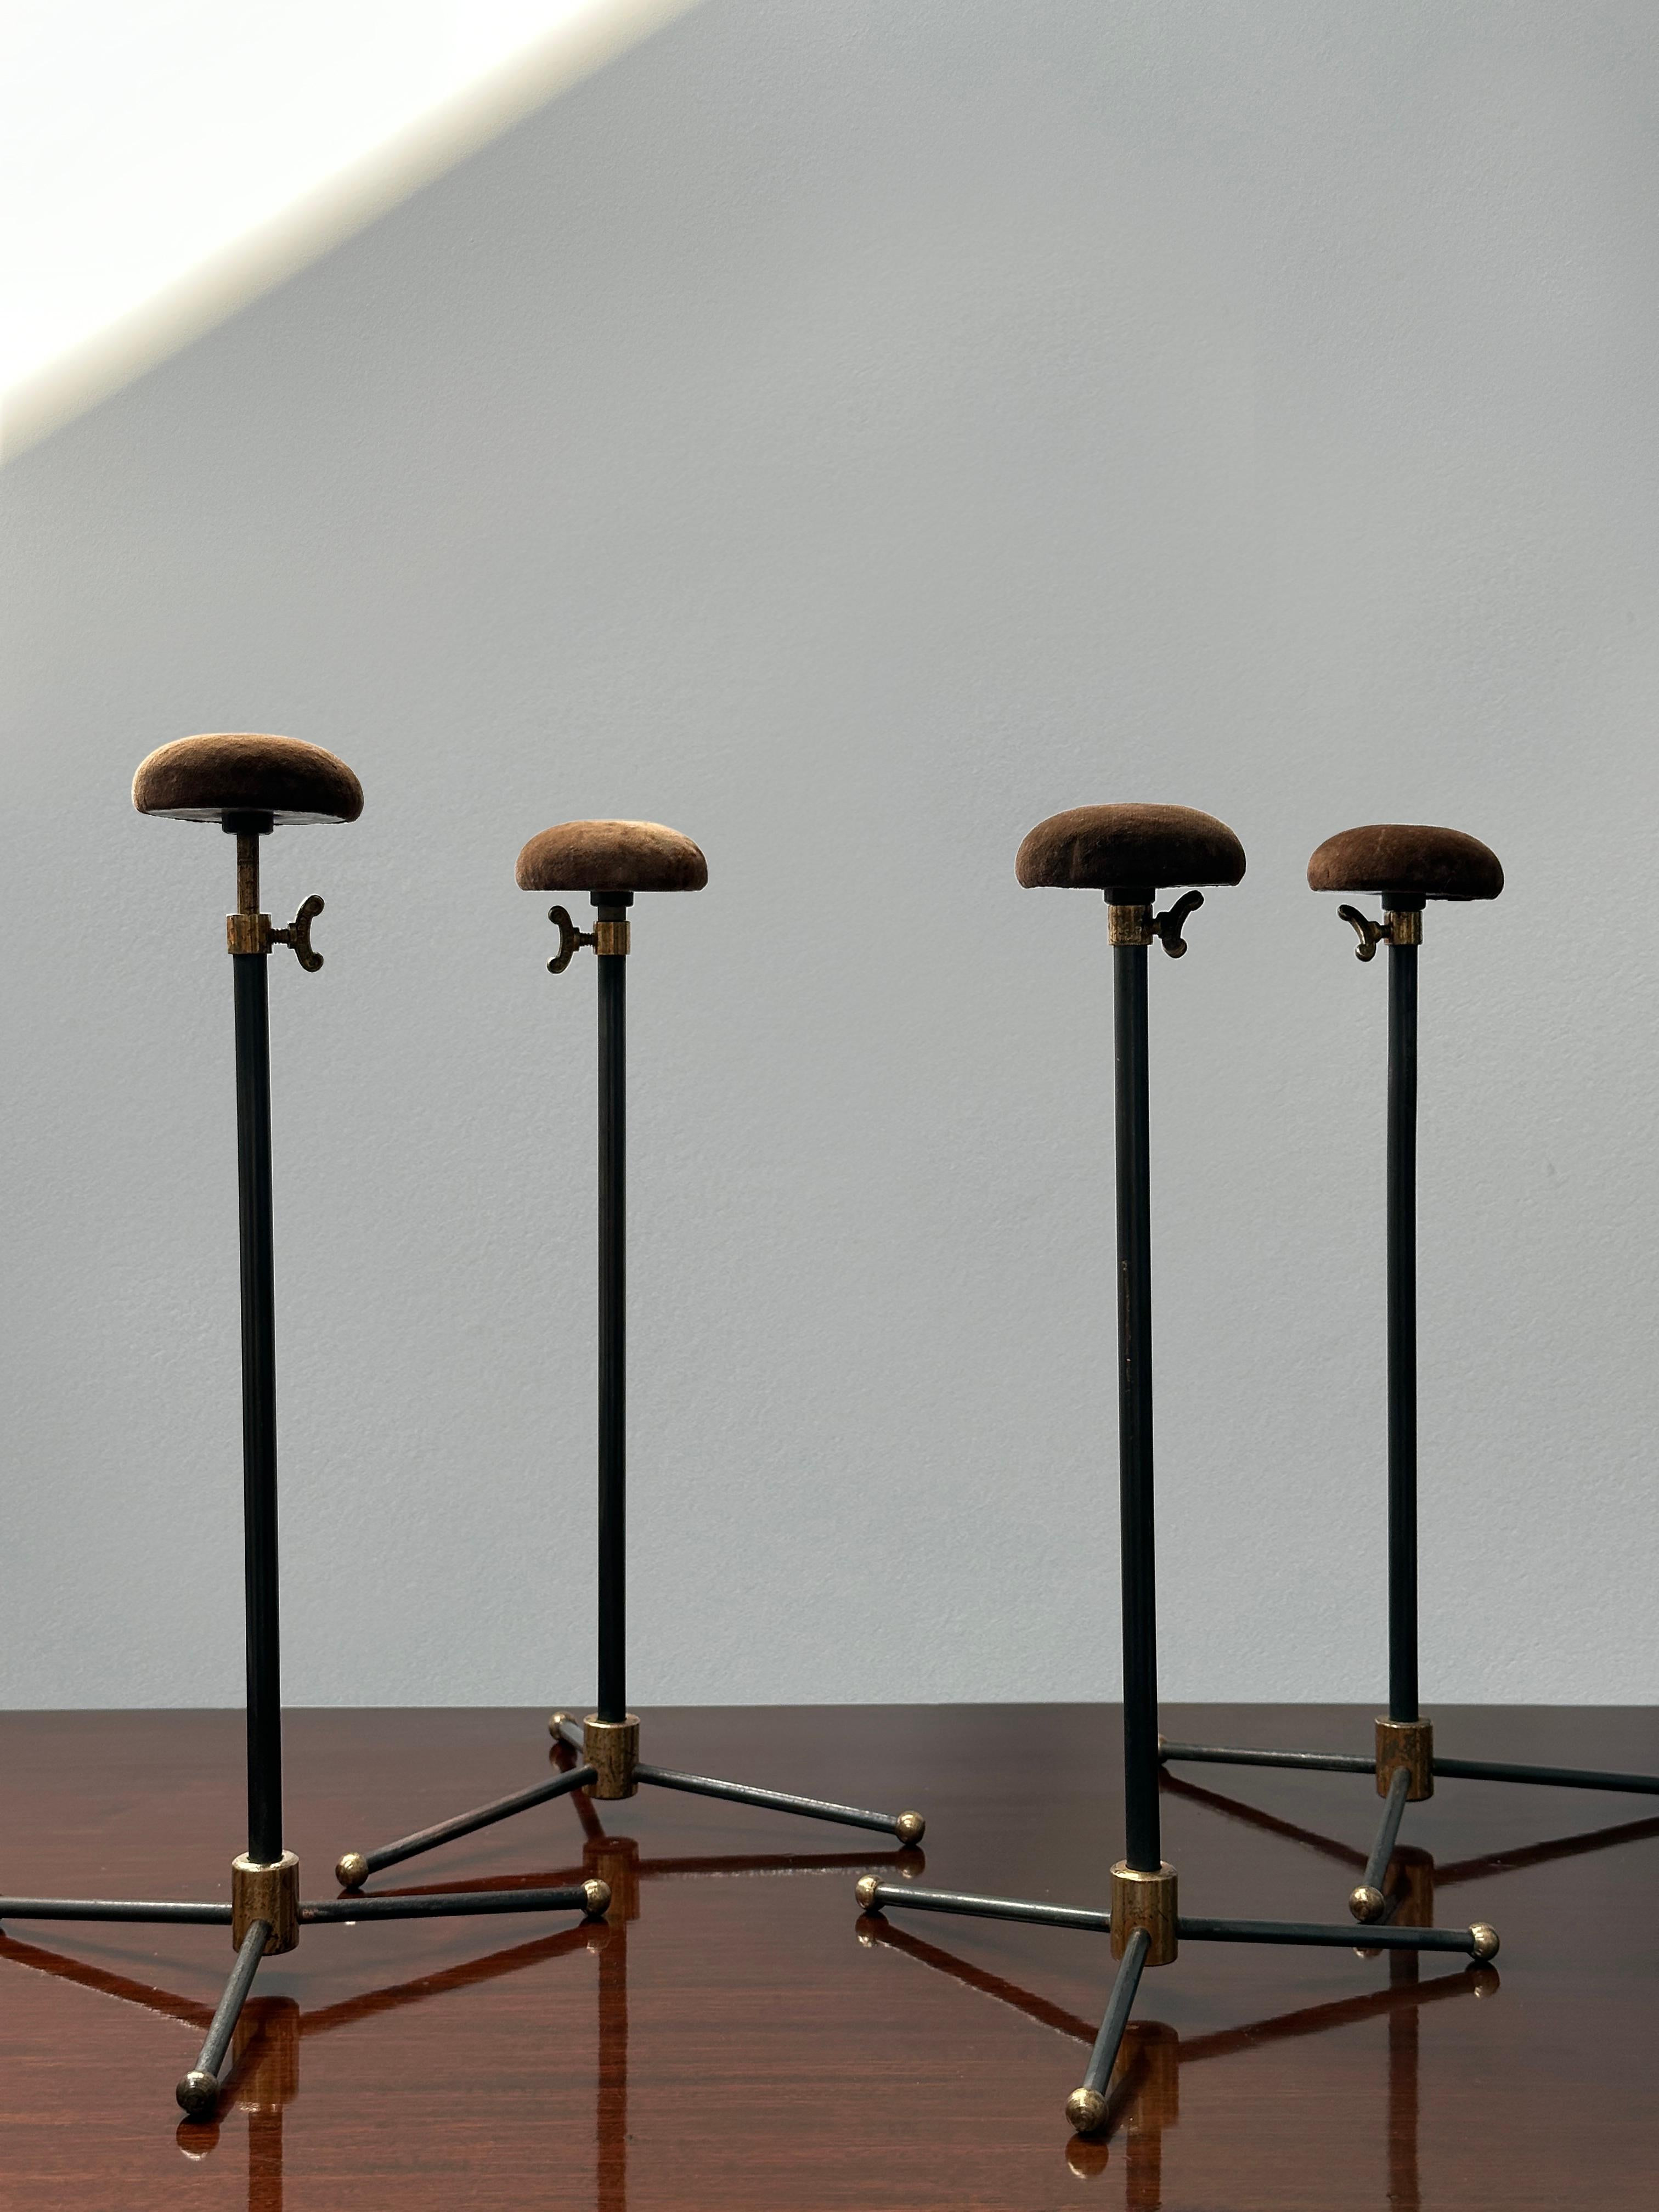 - The most wonderful set of decorative hat display stands fully stamped by makers Harris & Sheldon, England circa 1930.
- Each stand has a most unusual telescopic tripod base with makers mark to the brass turn key with inscription 'Harris' &